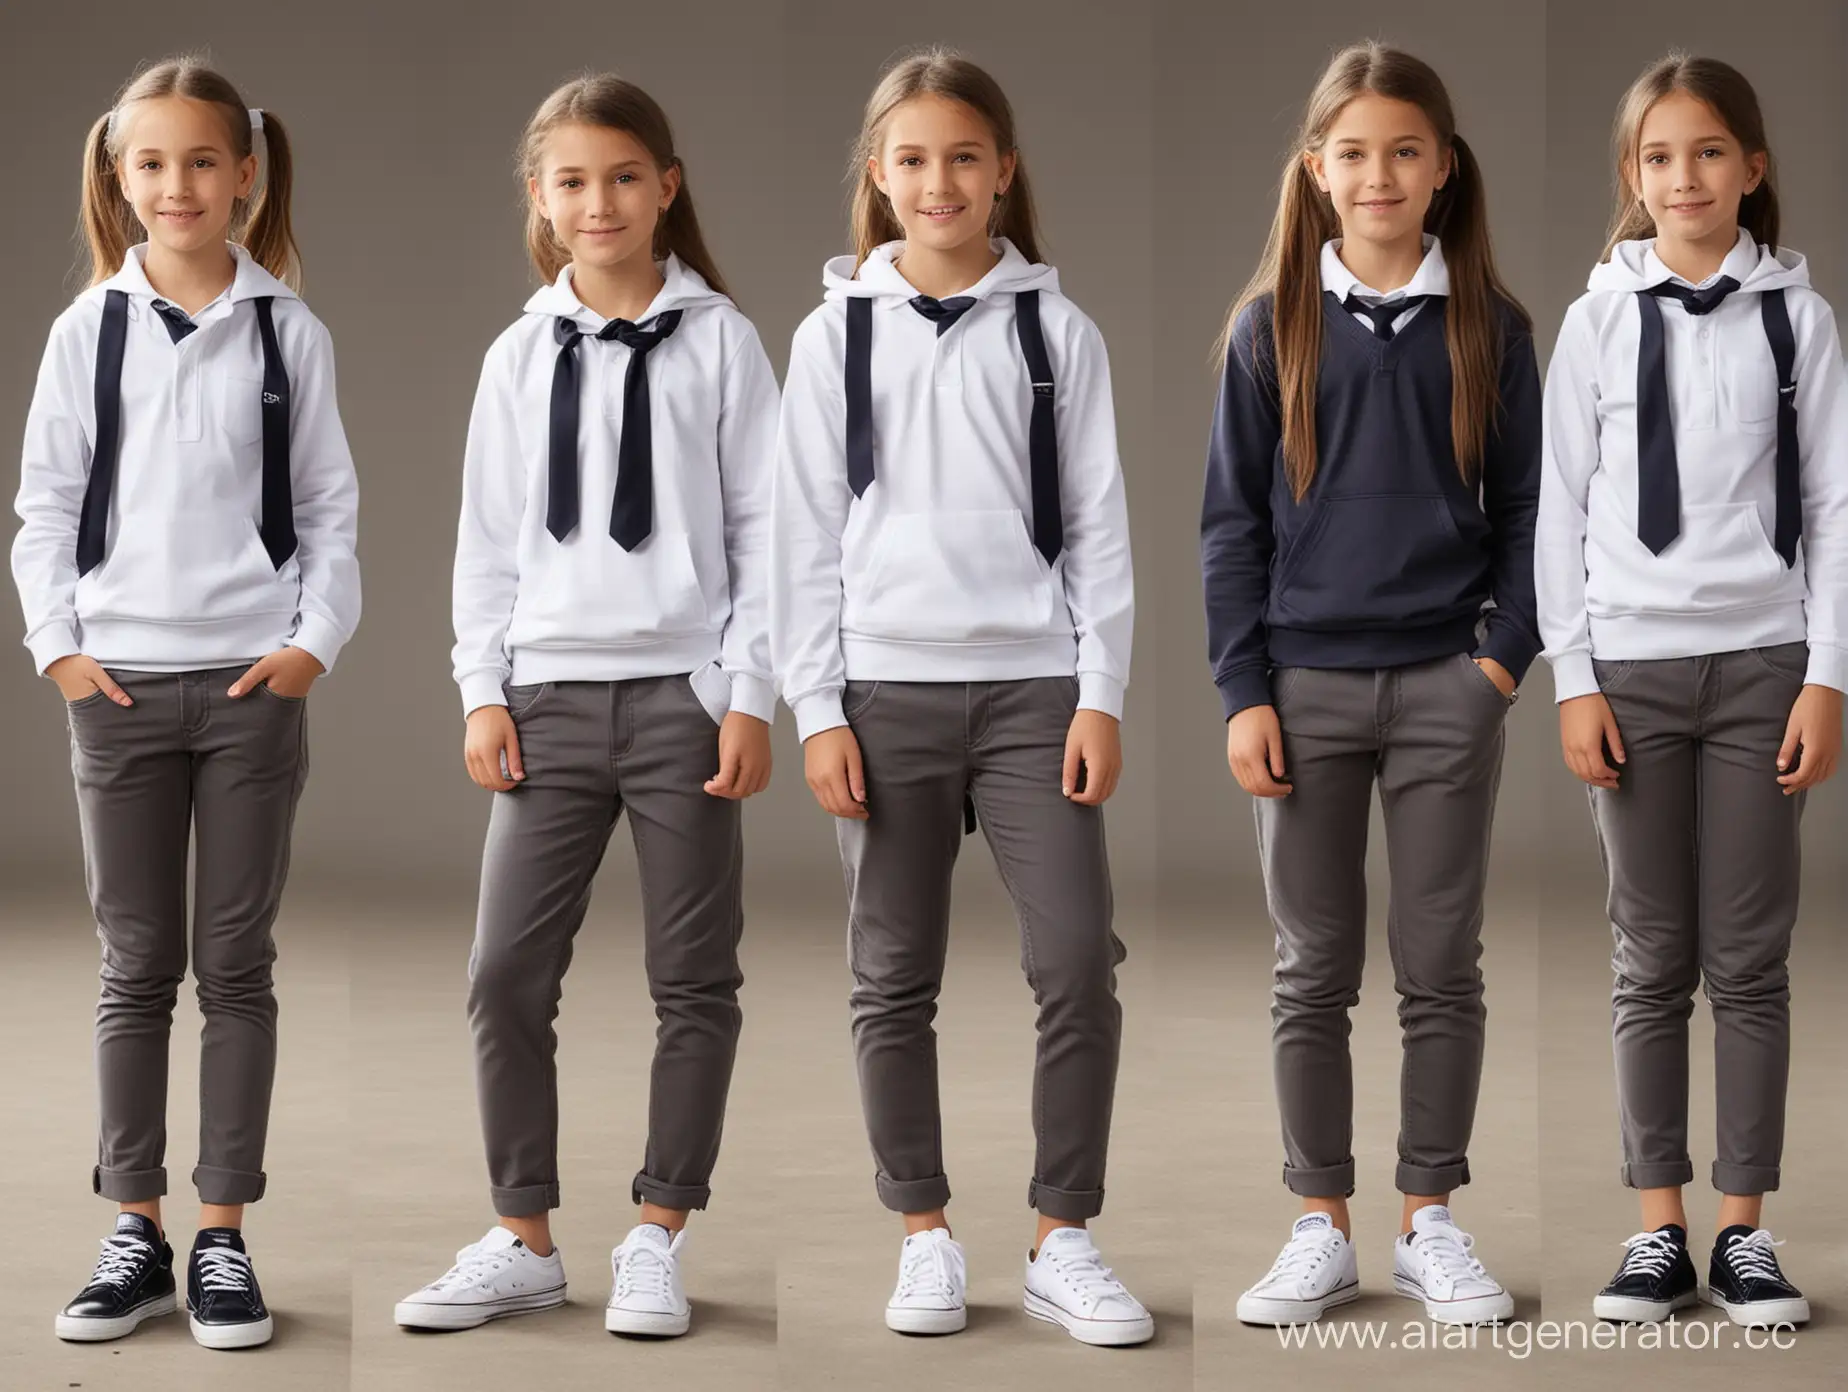 Unified-Future-School-Uniform-for-Boys-and-Girls-Comfortable-and-Stylish-Attire-with-Practical-Accessories